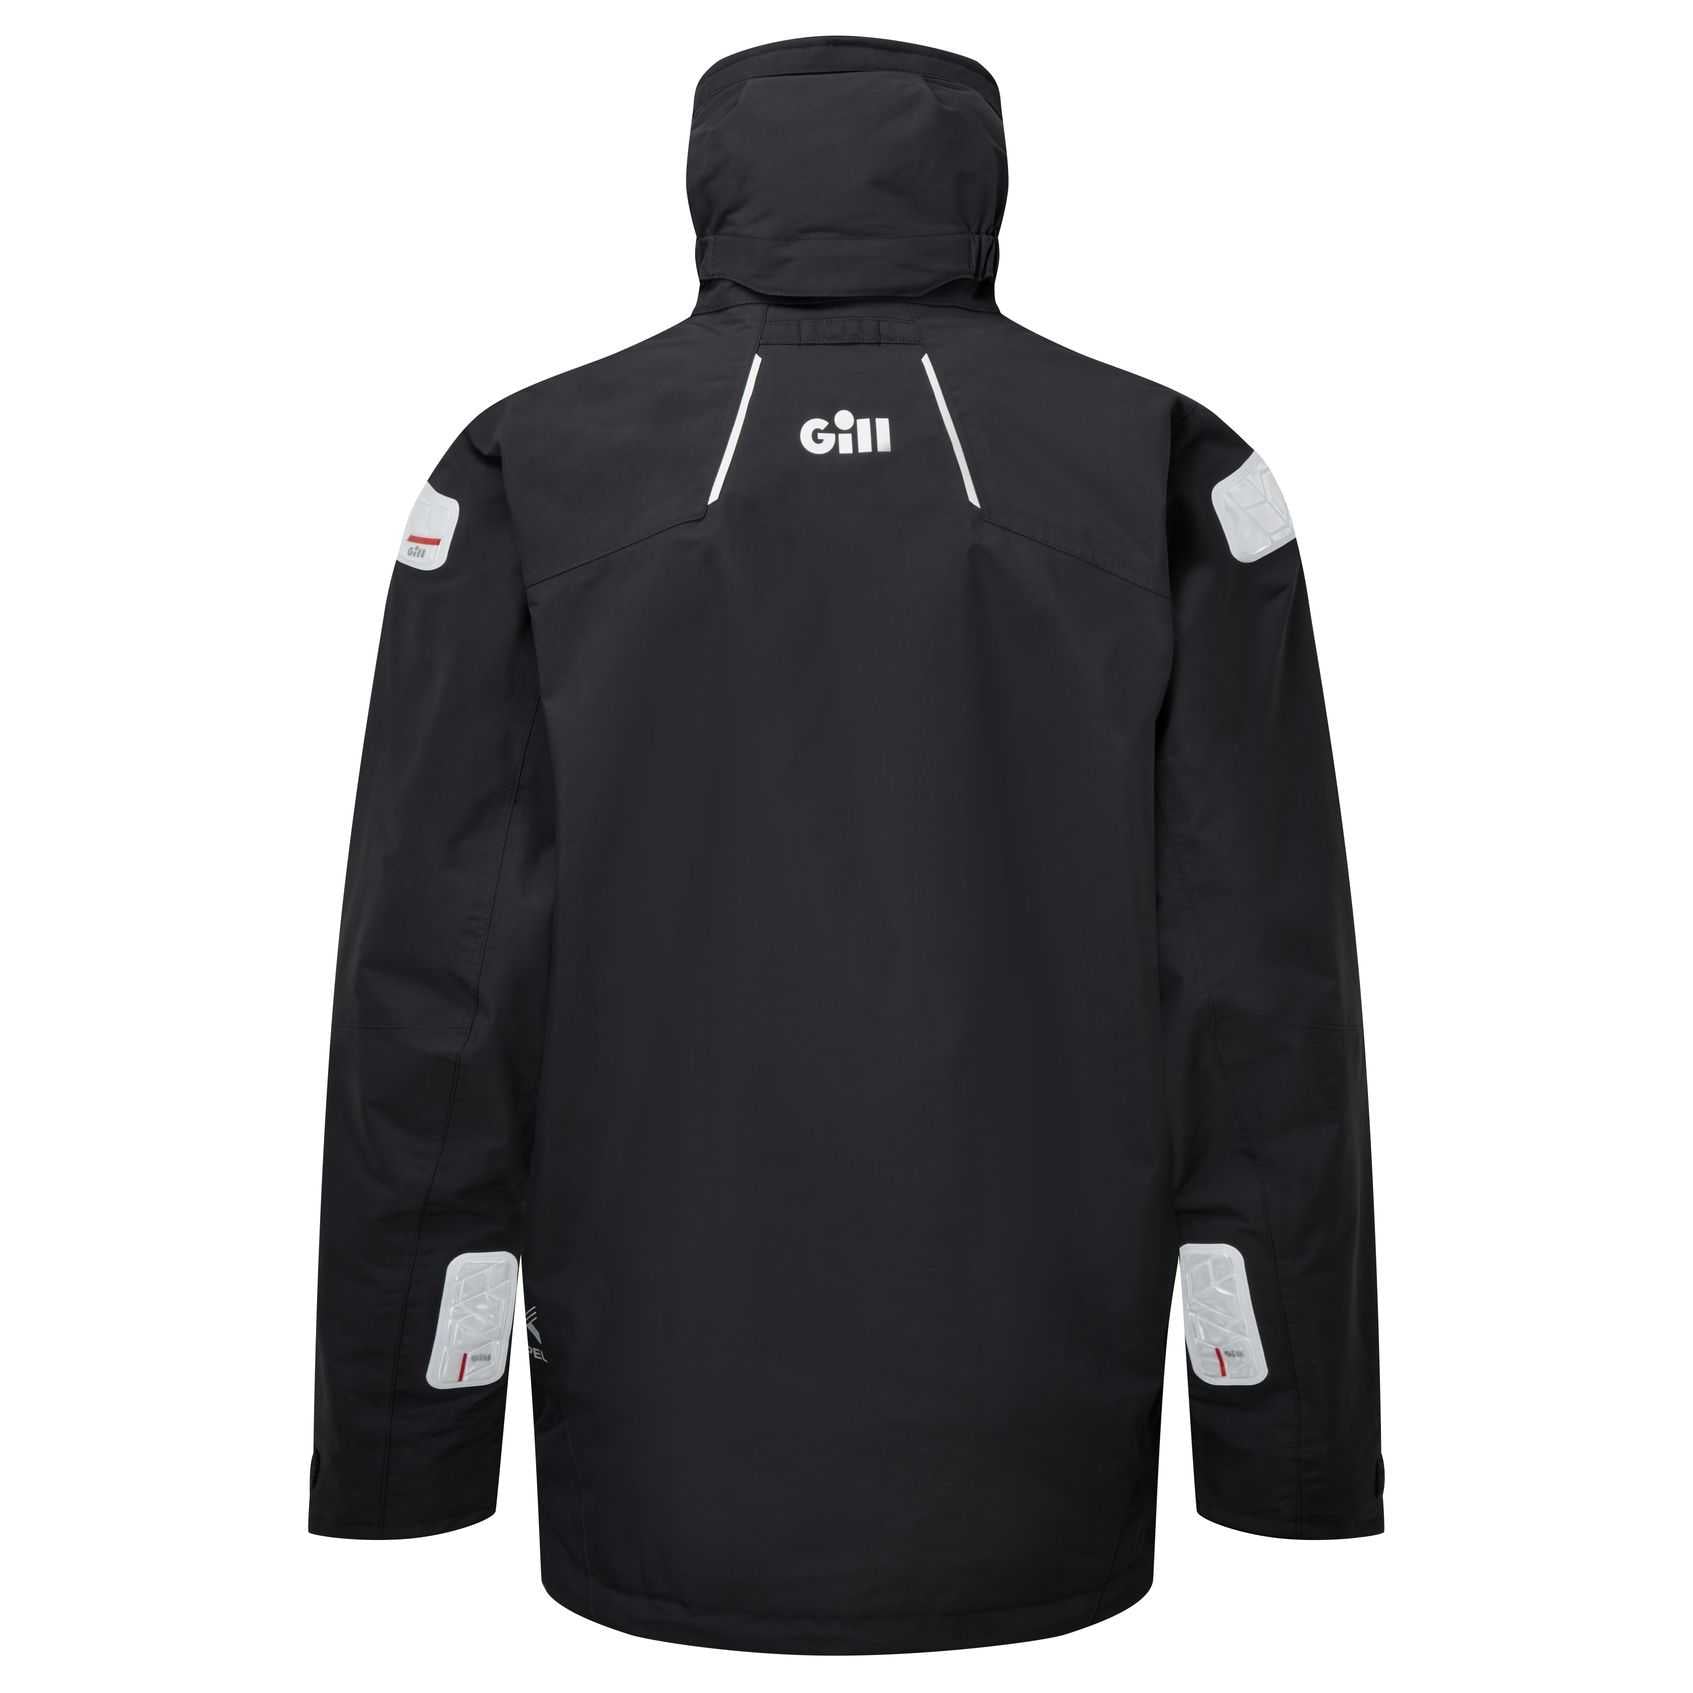 Gill - Offshore Jacket